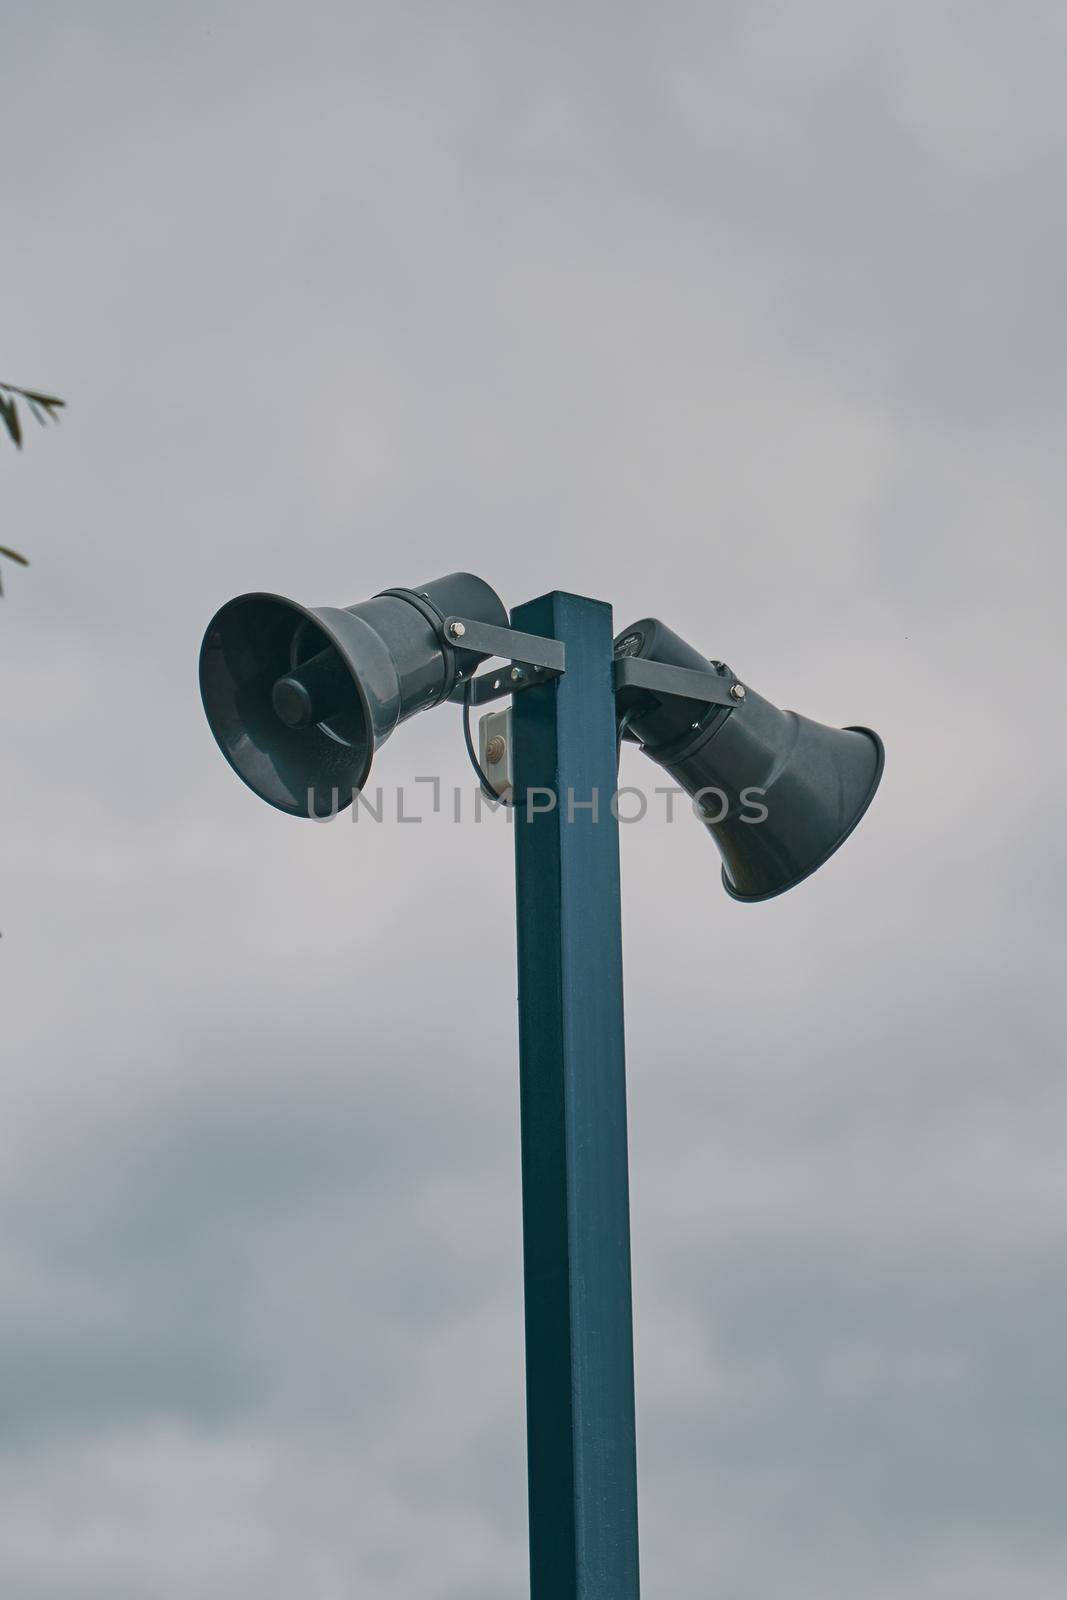 Tall metal column with two gray loudspeakers against cloudy sky. Hazard warning system. Providing security in the city, notification of emergencies.